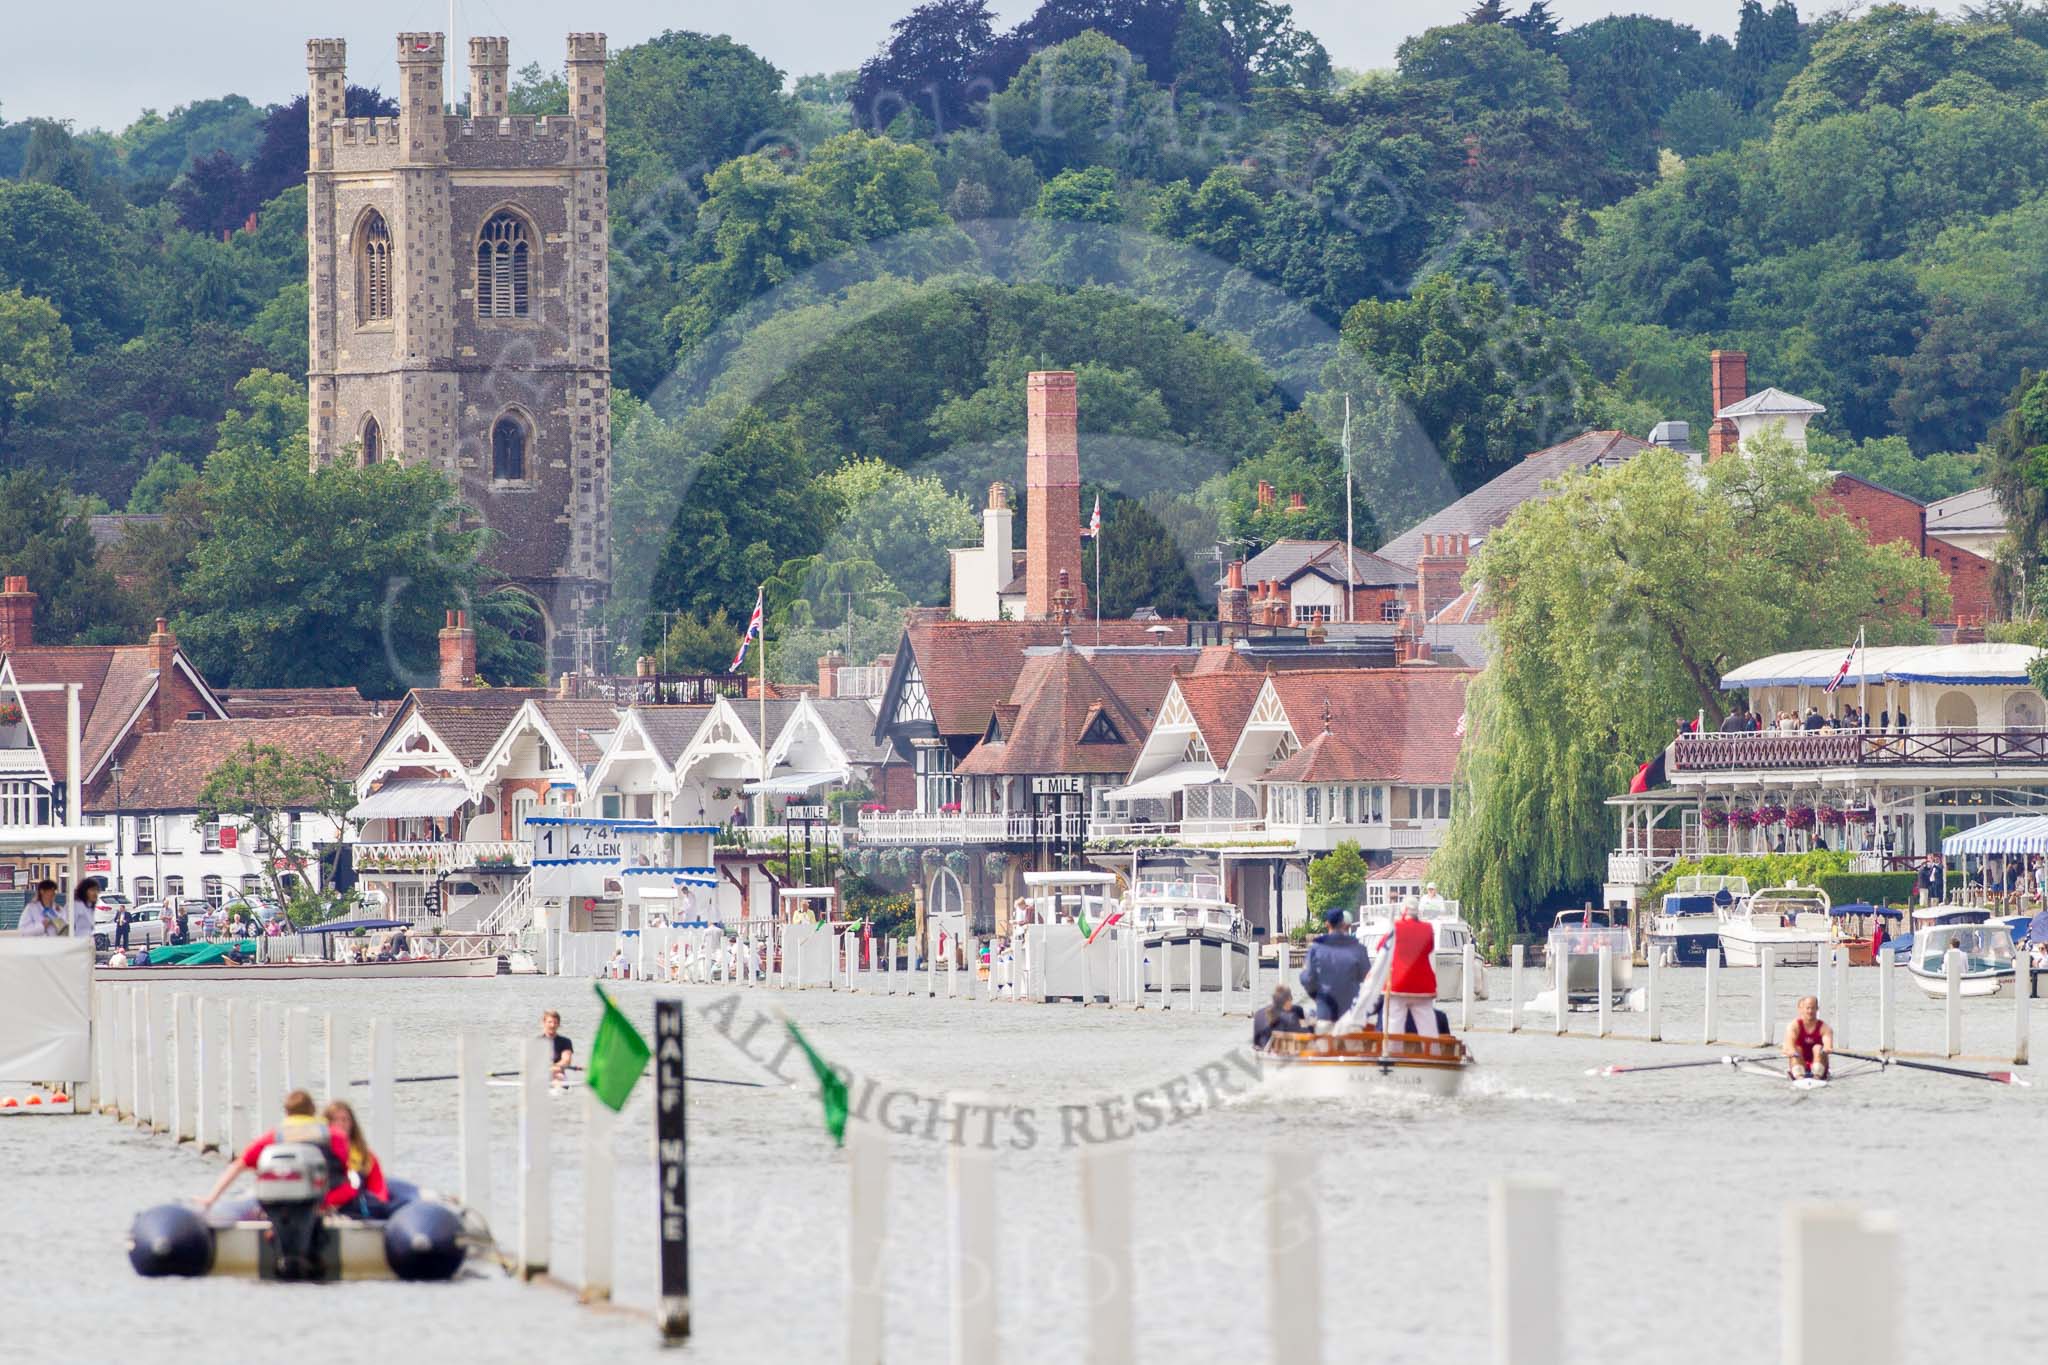 Henley Royal Regatta 2013, Thursday.
River Thames between Henley and Temple Island,
Henley-on-Thames,
Berkshire,
United Kingdom,
on 04 July 2013 at 10:55, image #110